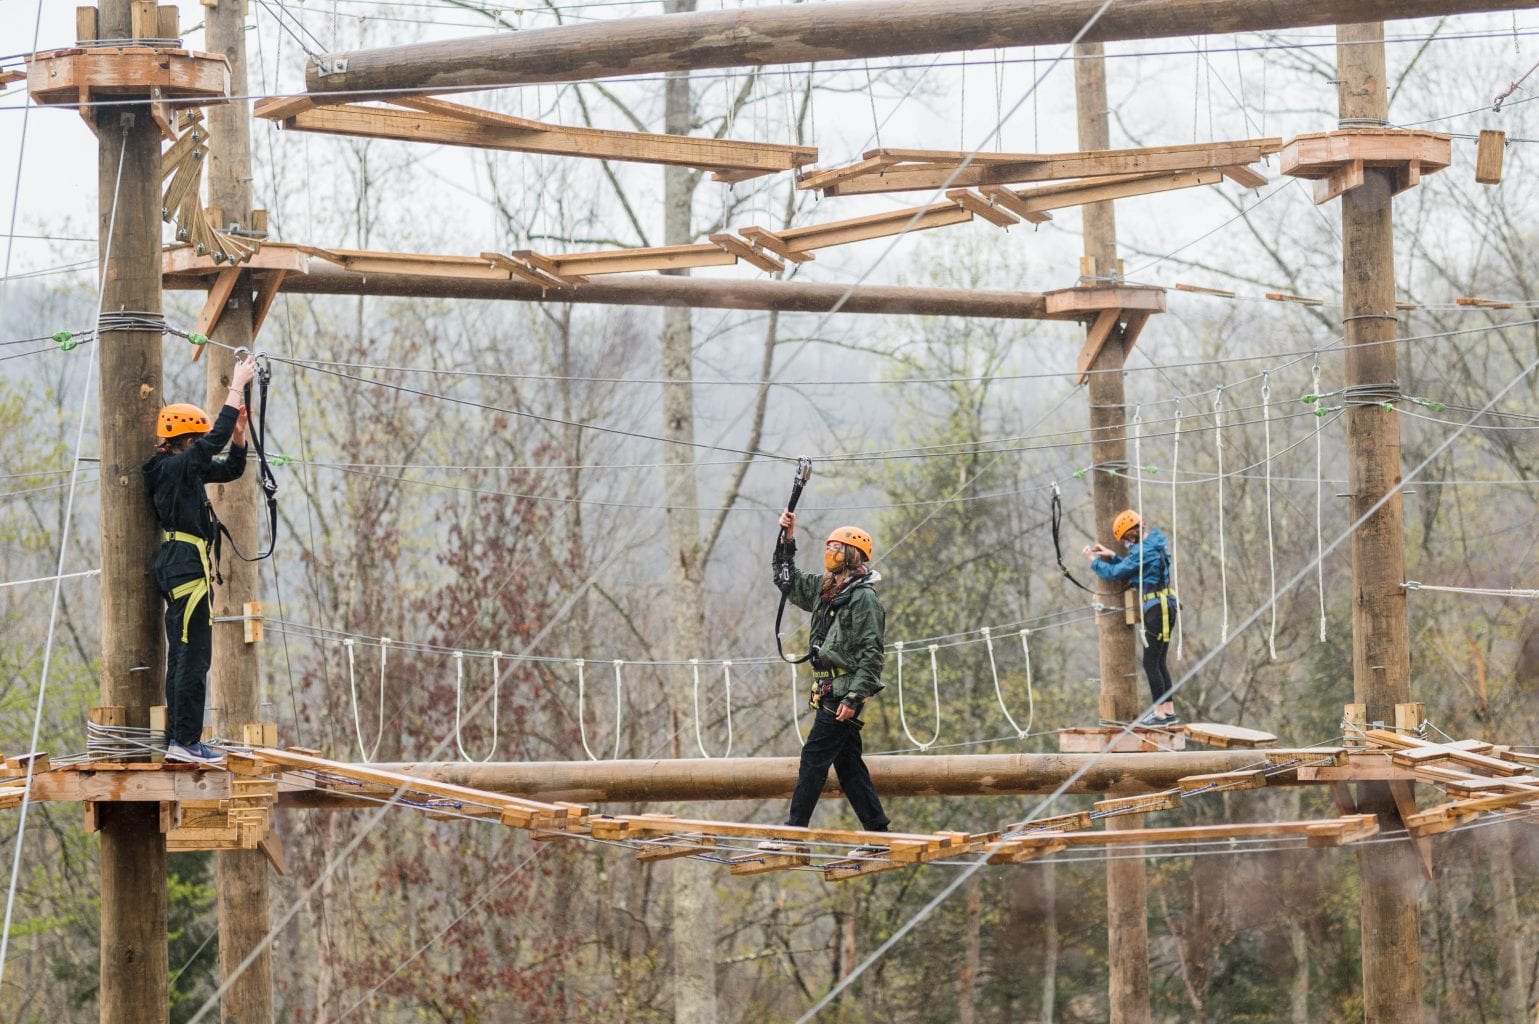 Guests on aerial park